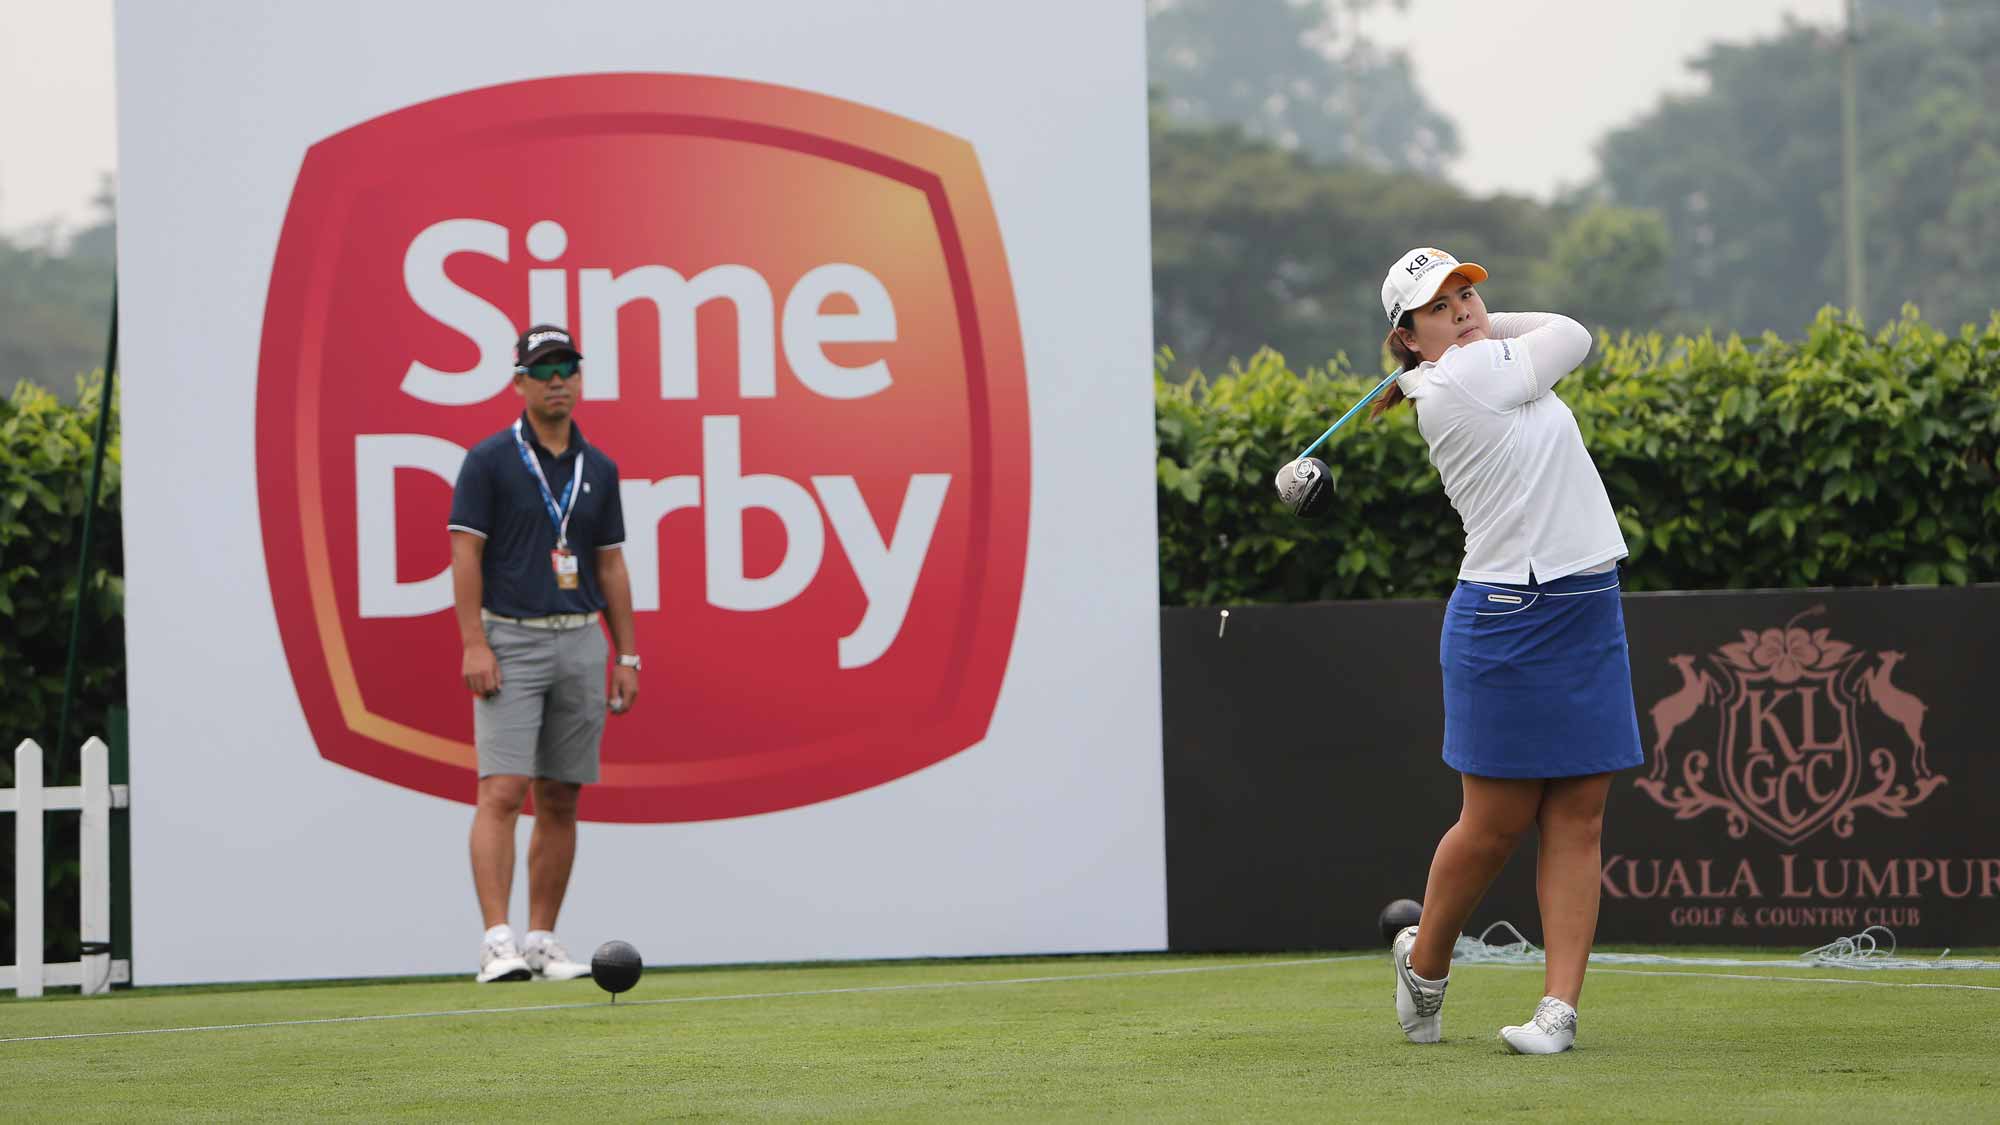 Inbee Park during her practice round at the 2015 Sime Darby LPGA Malaysia 